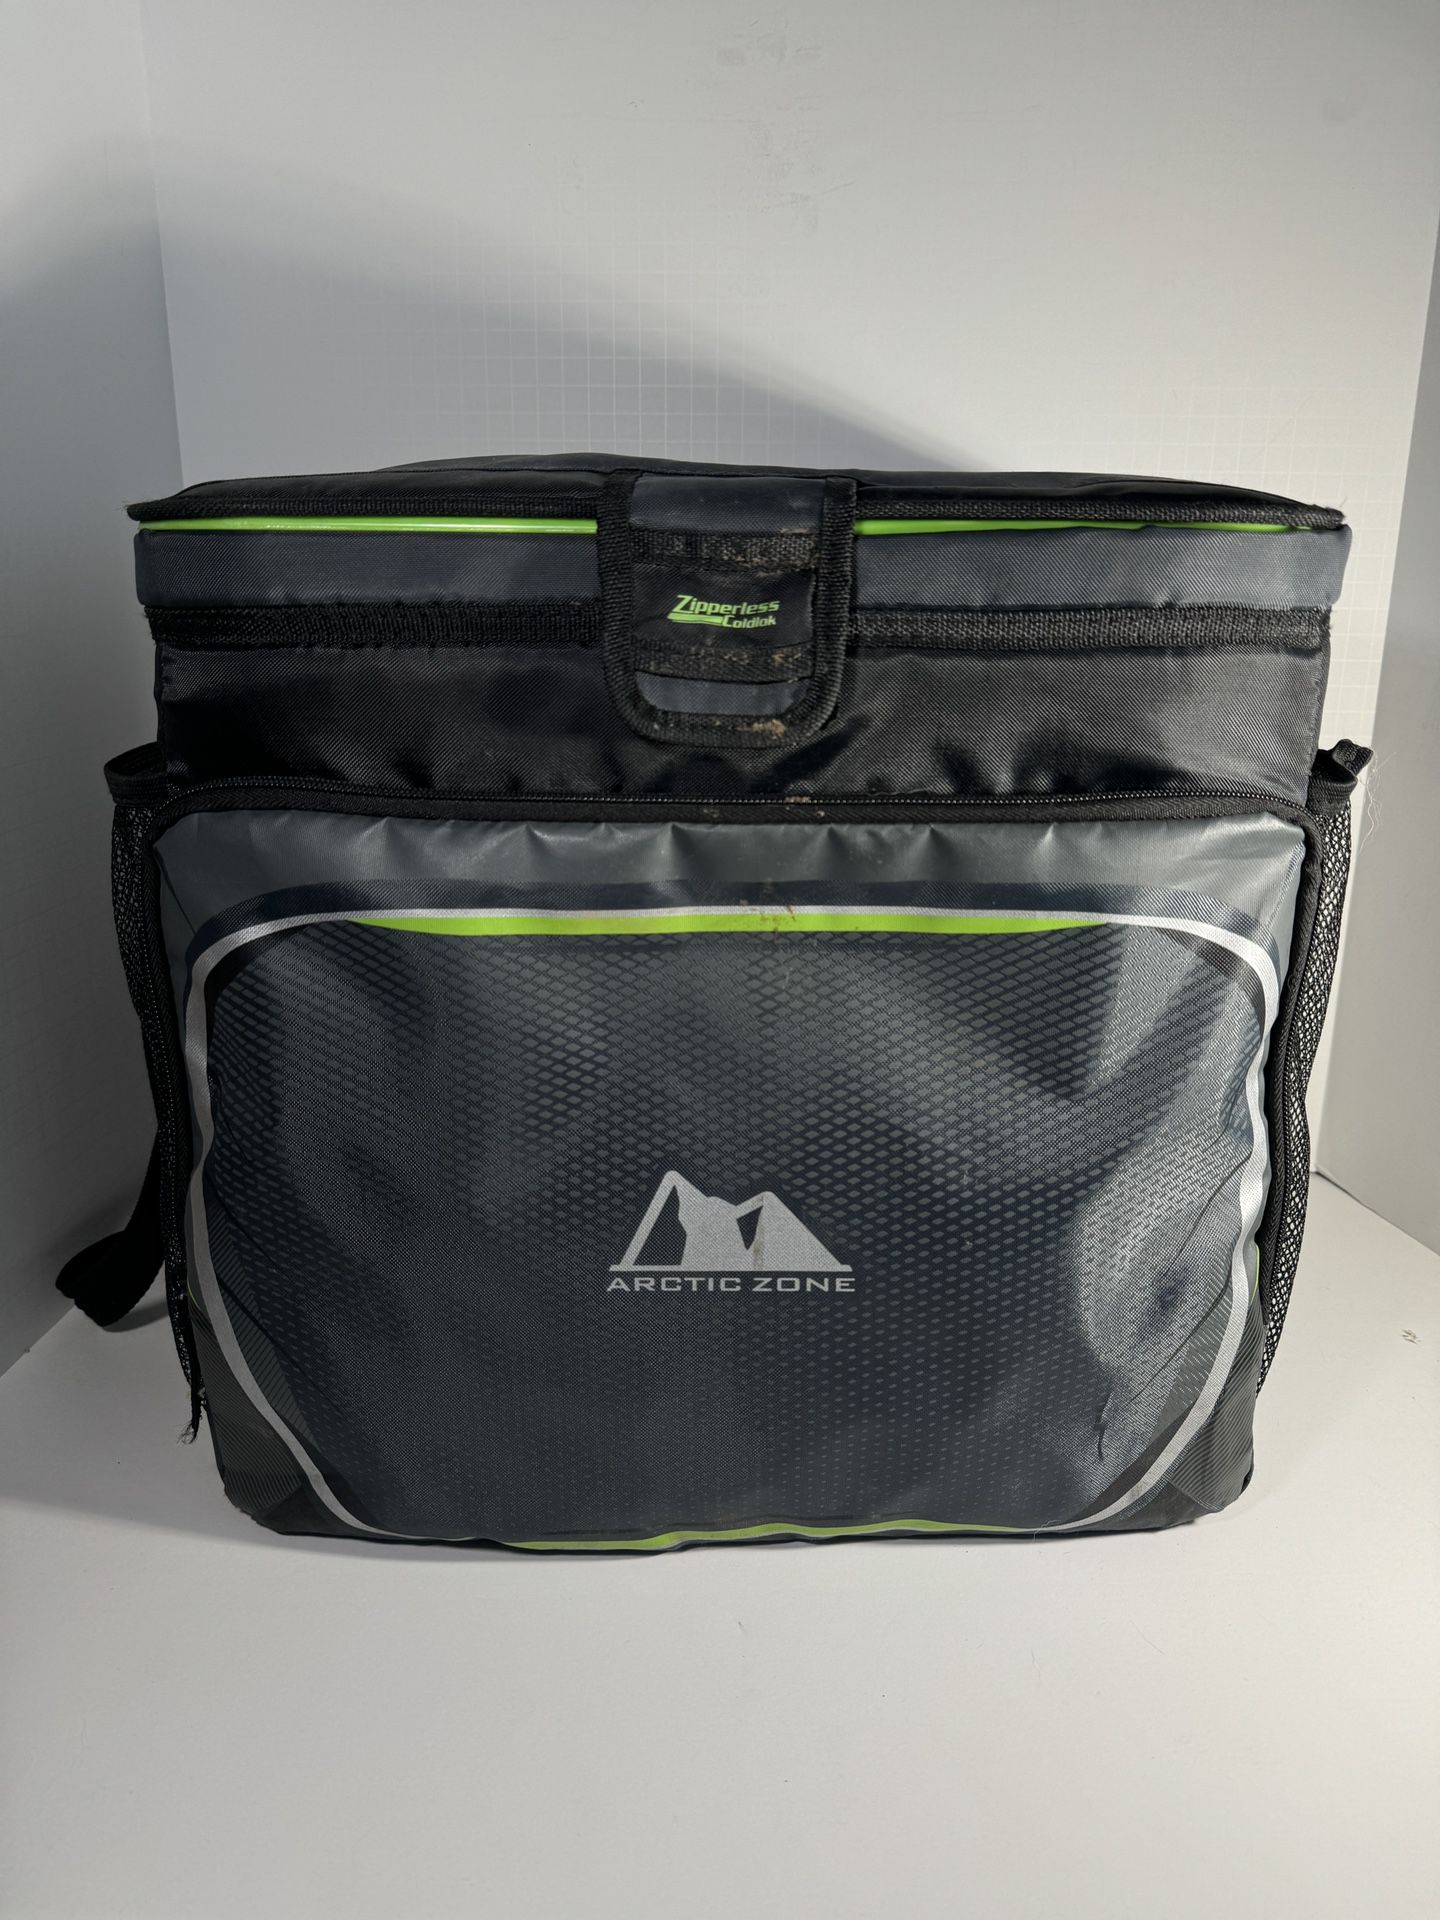 Large Arctic Zone Cooler Bag 15”x13”x10” 30 Cans